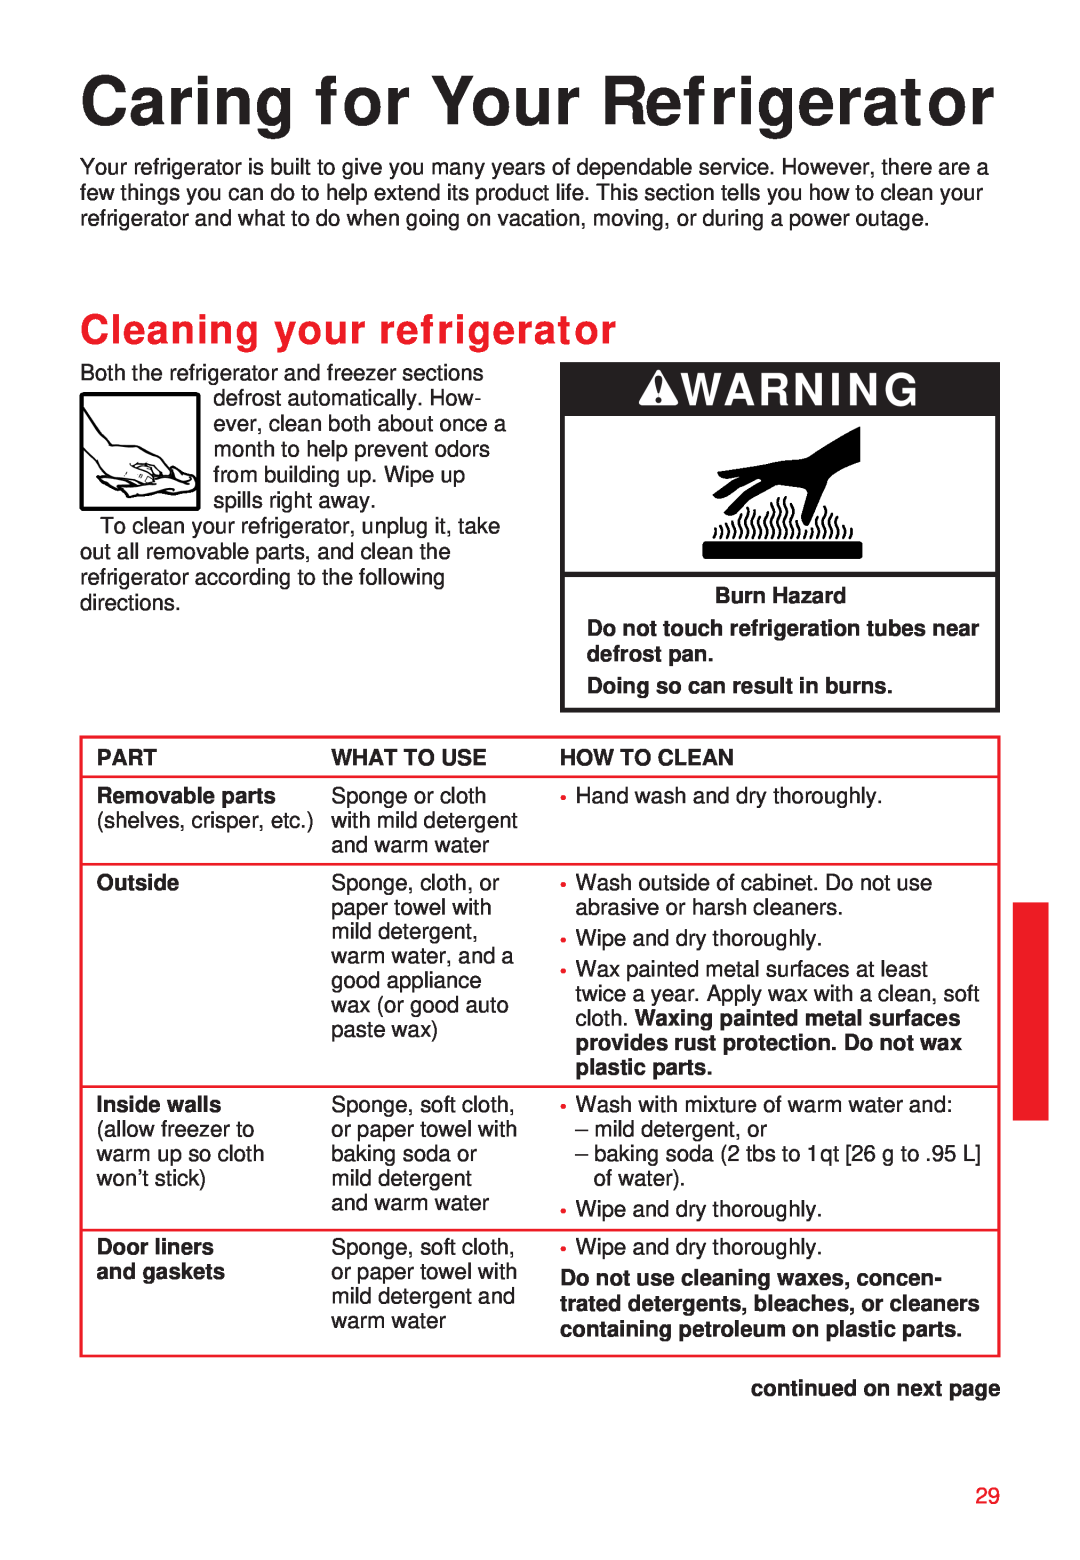 Whirlpool 2195258 Caring for Your Refrigerator, Burn Hazard, Do not touch refrigeration tubes near, defrost pan, Part 